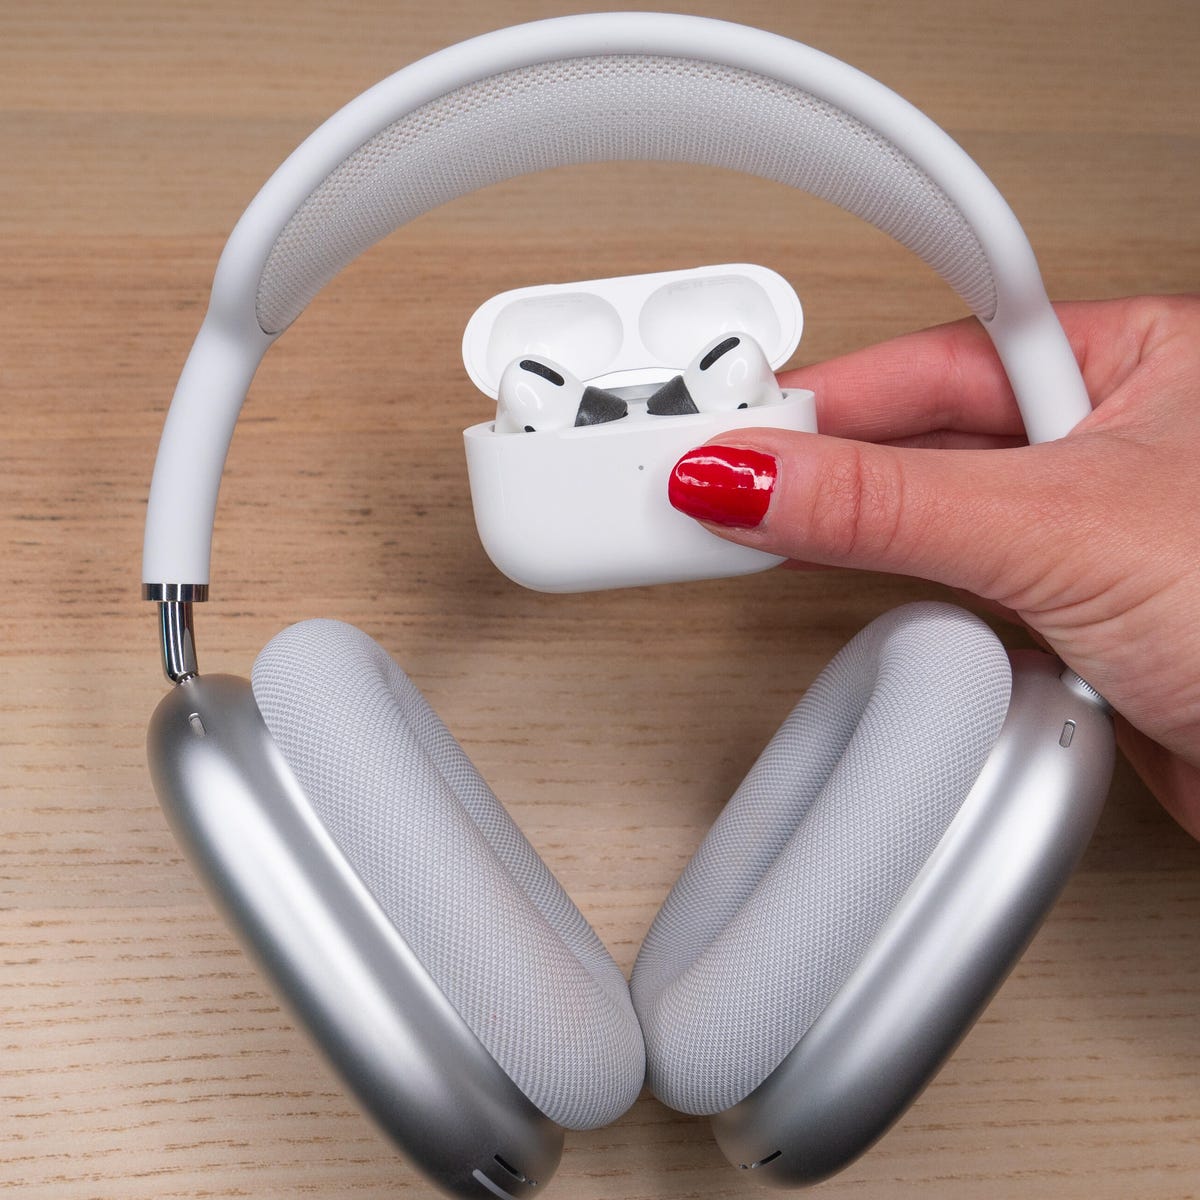 Apple AirPods Pro, AirPods Max headphones get Find My upgrade - CNET